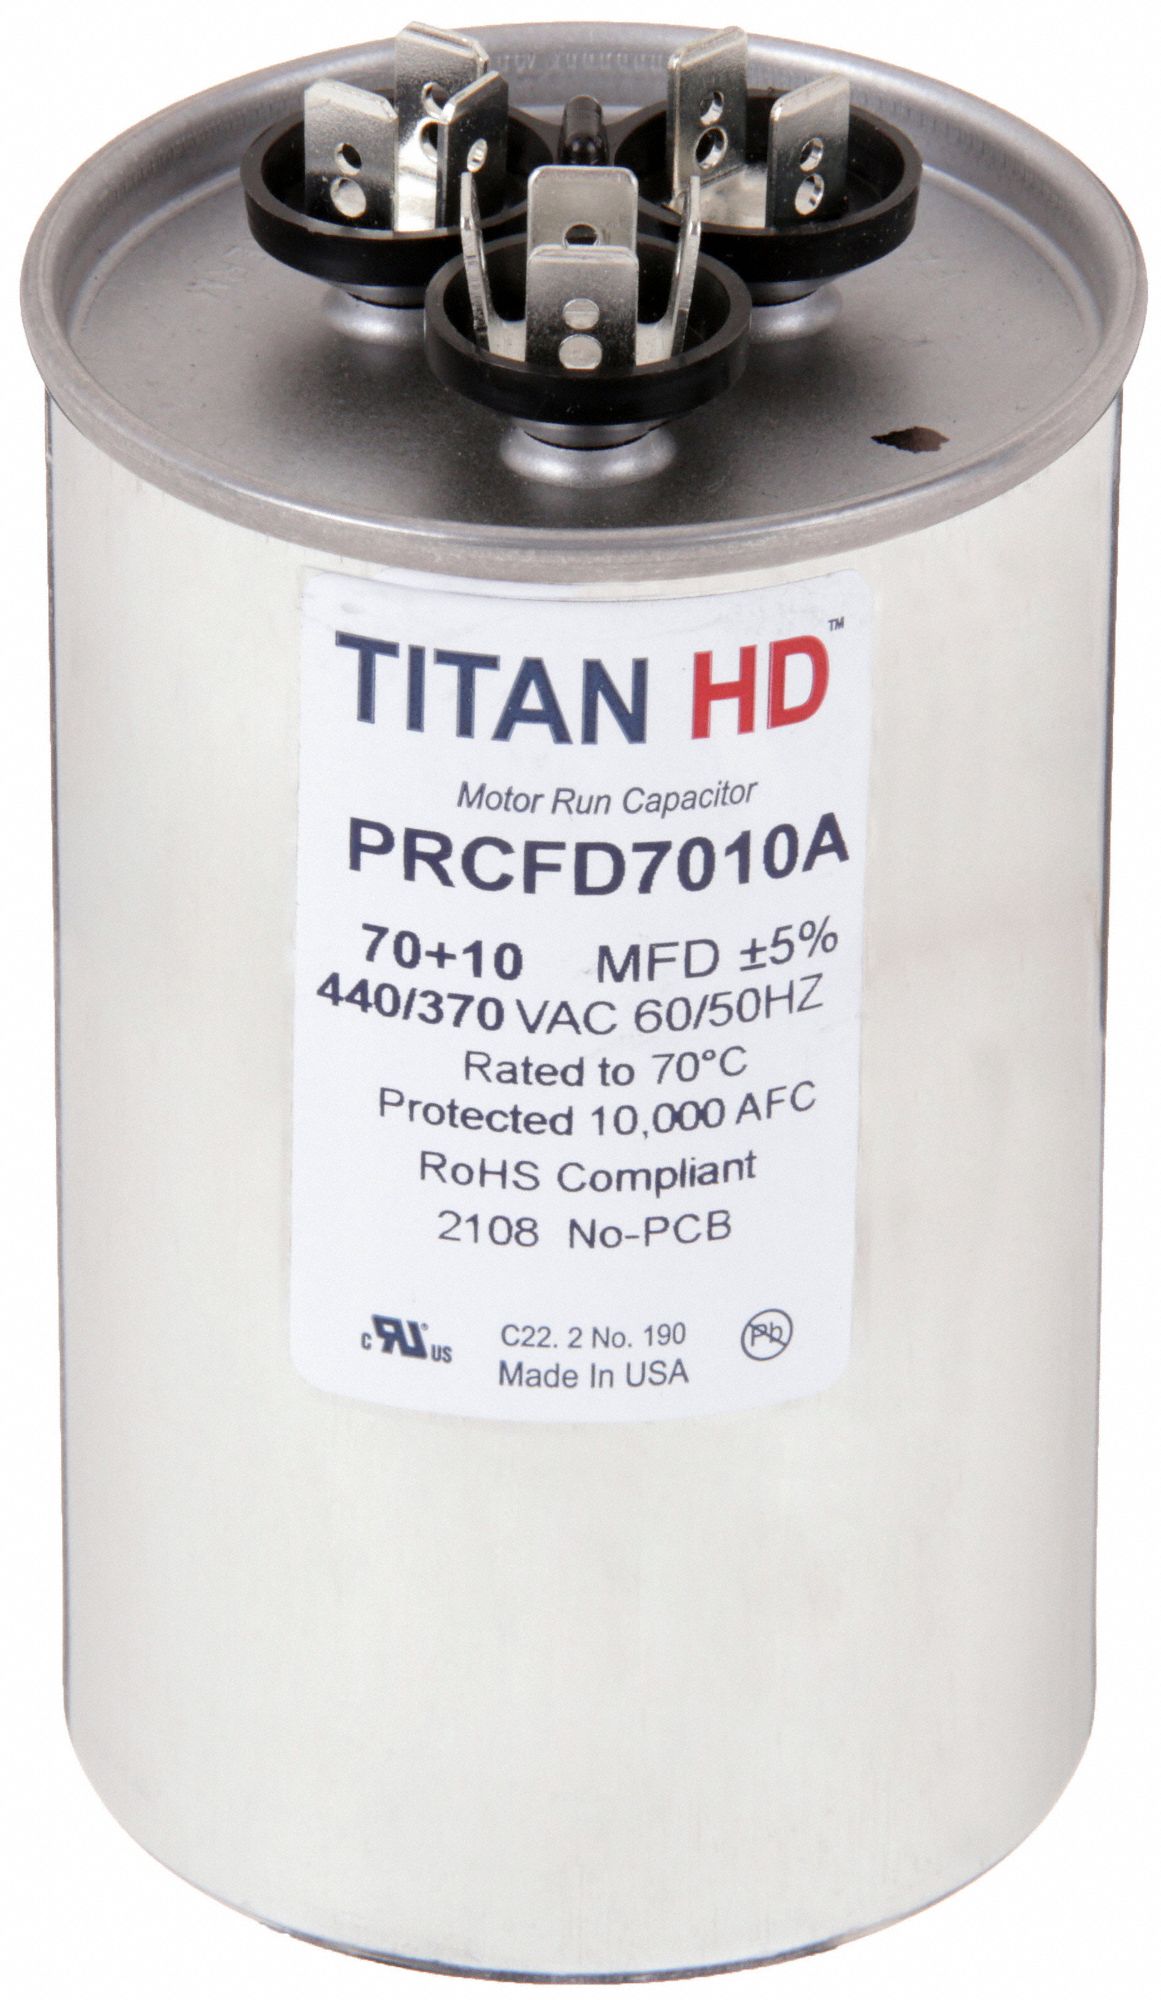 TITAN HD Motor Dual Run Capacitor: Round, 440/370V AC, 70/10 mfd, 4 13/32  in Overall Ht